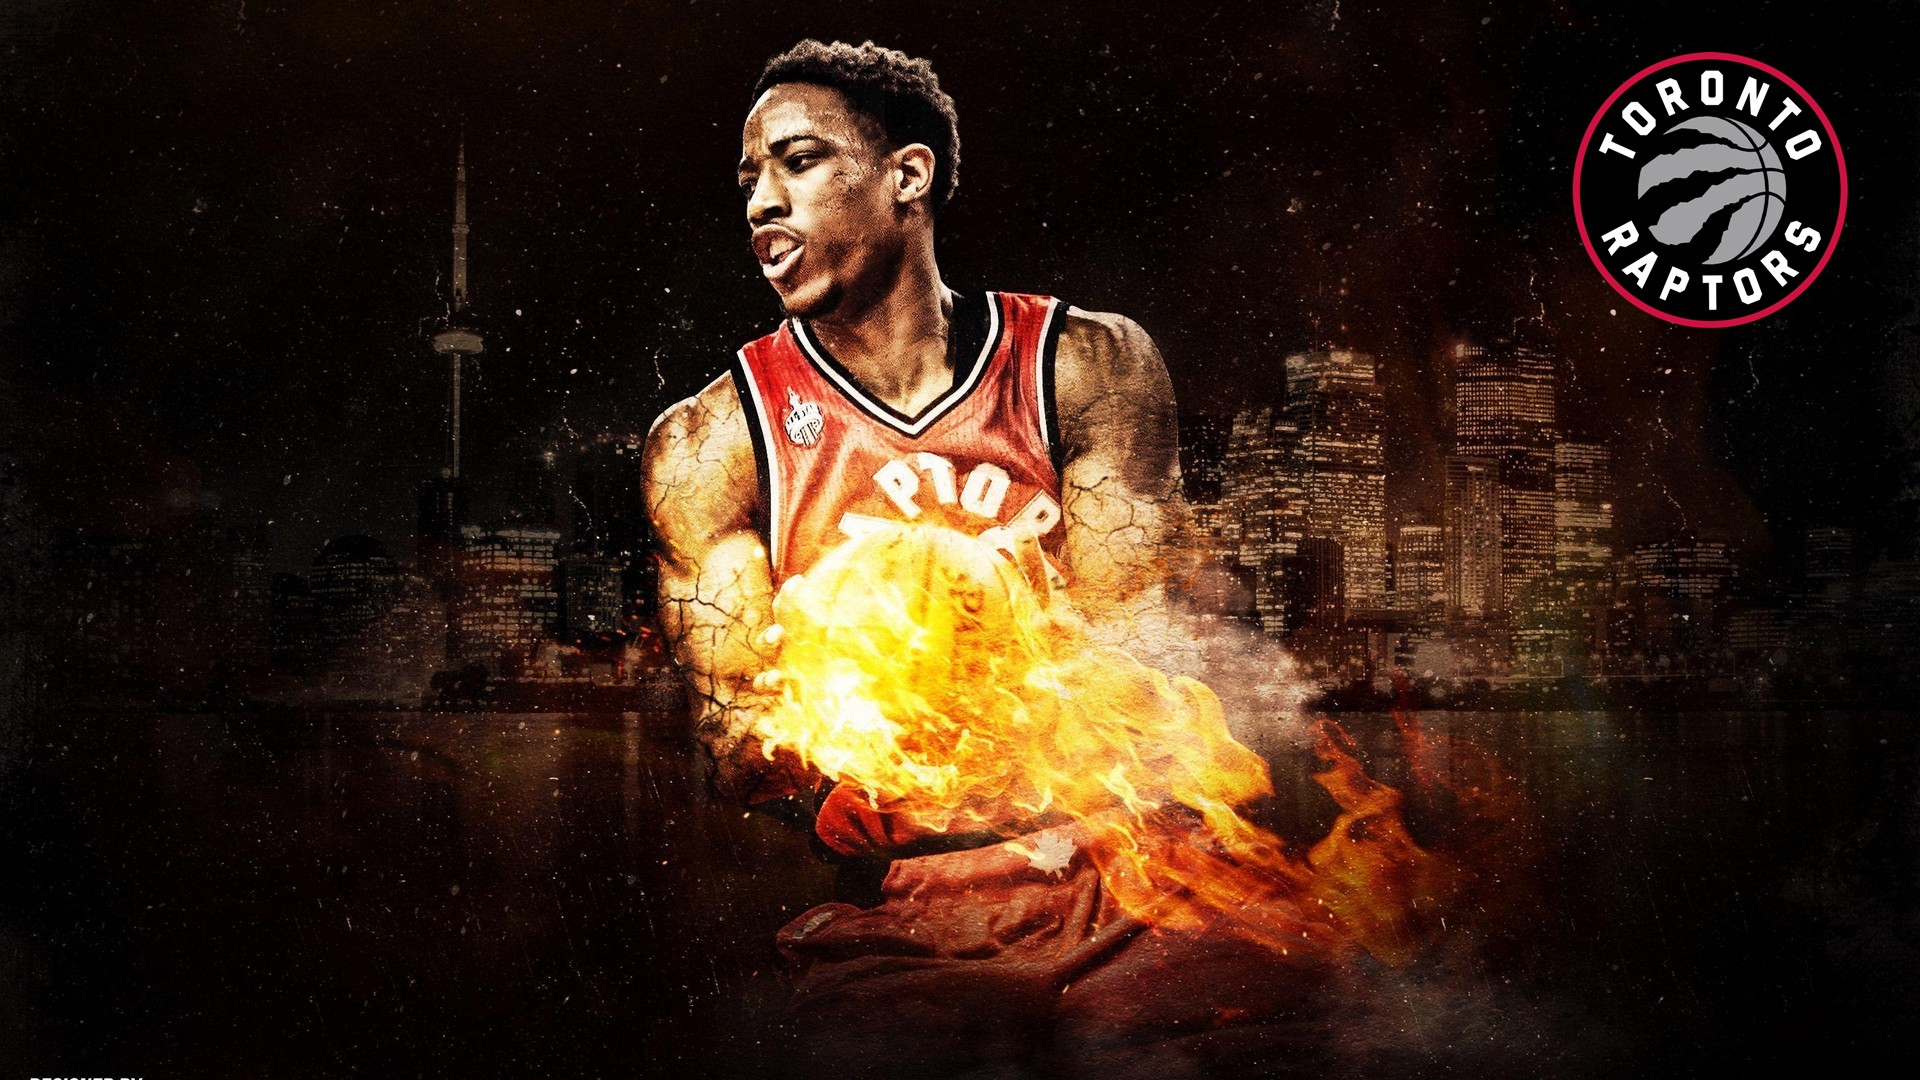 HD Backgrounds DeMar DeRozan with image dimensions 1920x1080 pixel. You can make this wallpaper for your Desktop Computer Backgrounds, Windows or Mac Screensavers, iPhone Lock screen, Tablet or Android and another Mobile Phone device